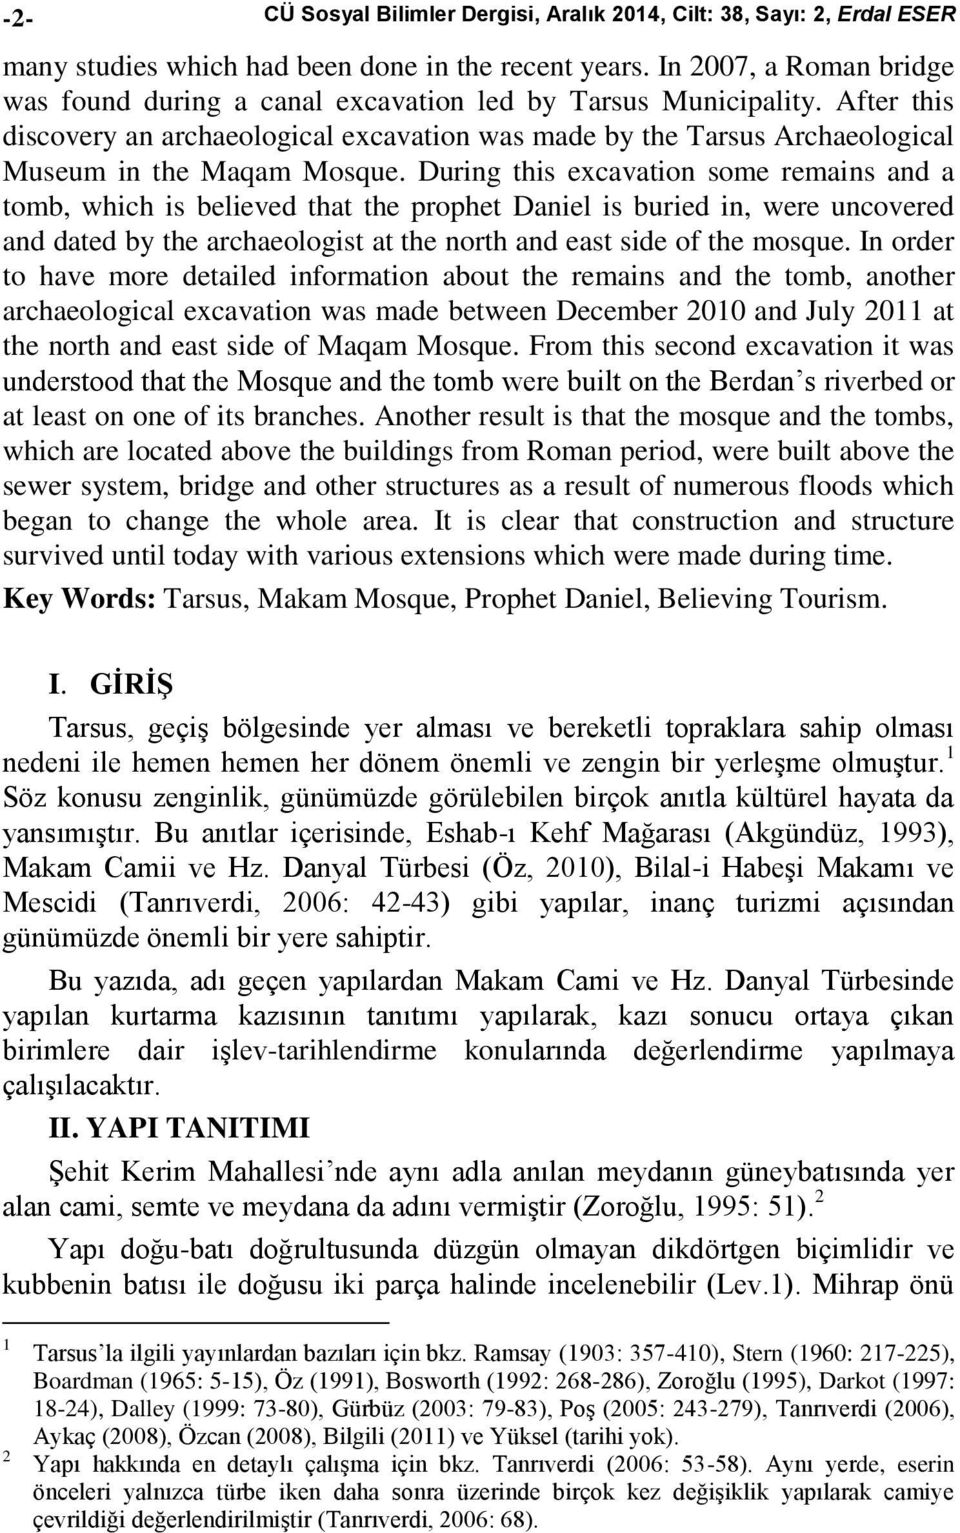 After this discovery an archaeological excavation was made by the Tarsus Archaeological Museum in the Maqam Mosque.